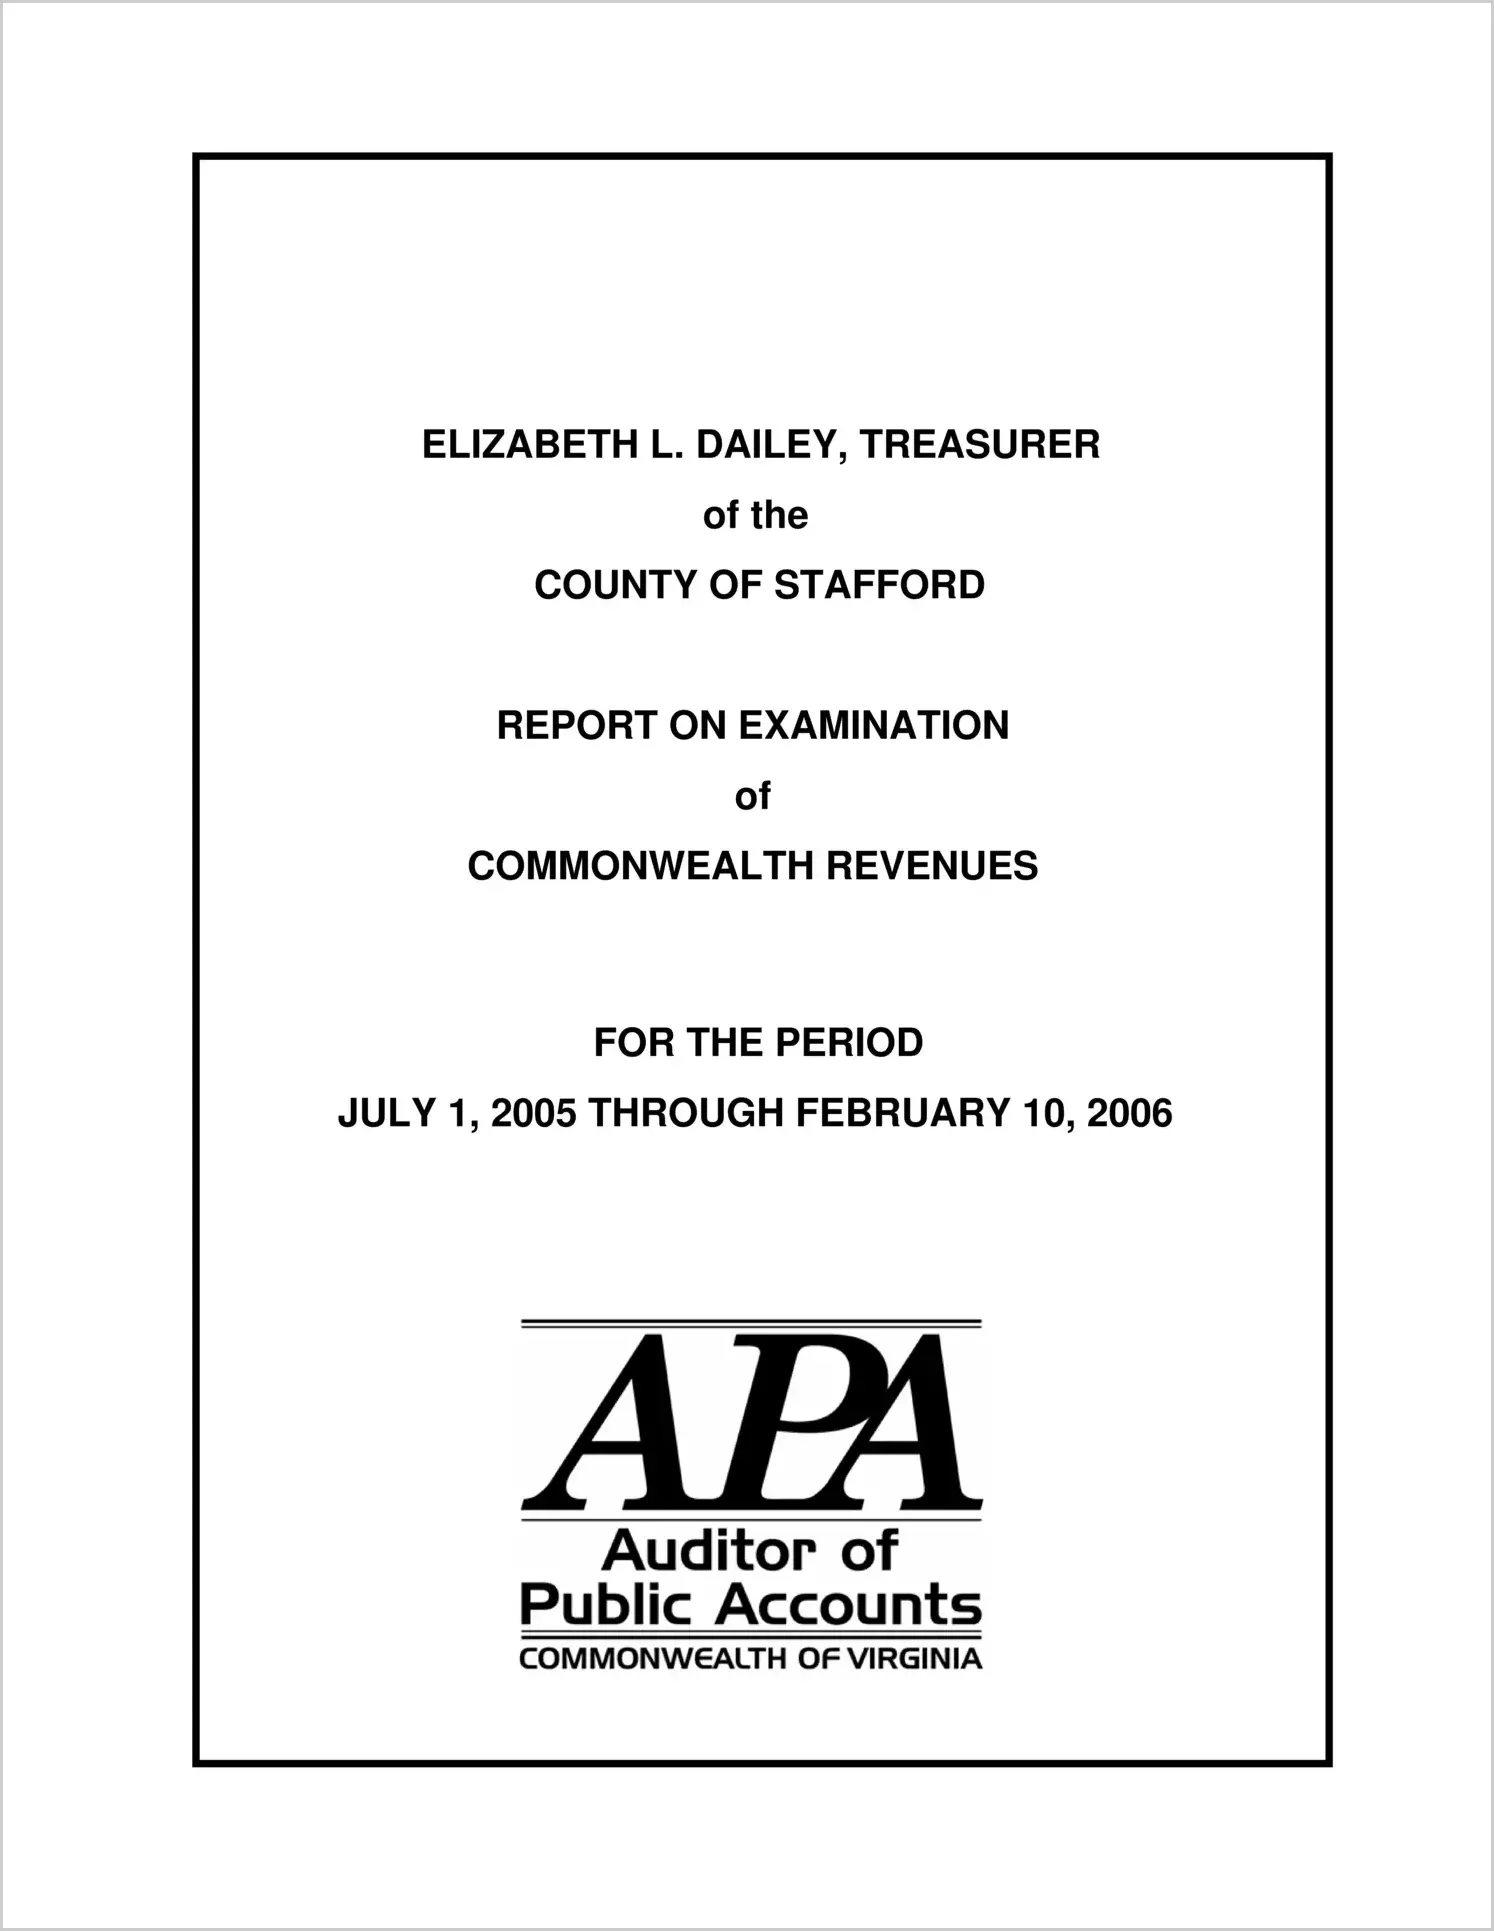 Elizabeth L. Dailey of the County of Stafford Report on Examination of the Commonwealth Revenues for the period July 1, 2005 through February 10, 2006